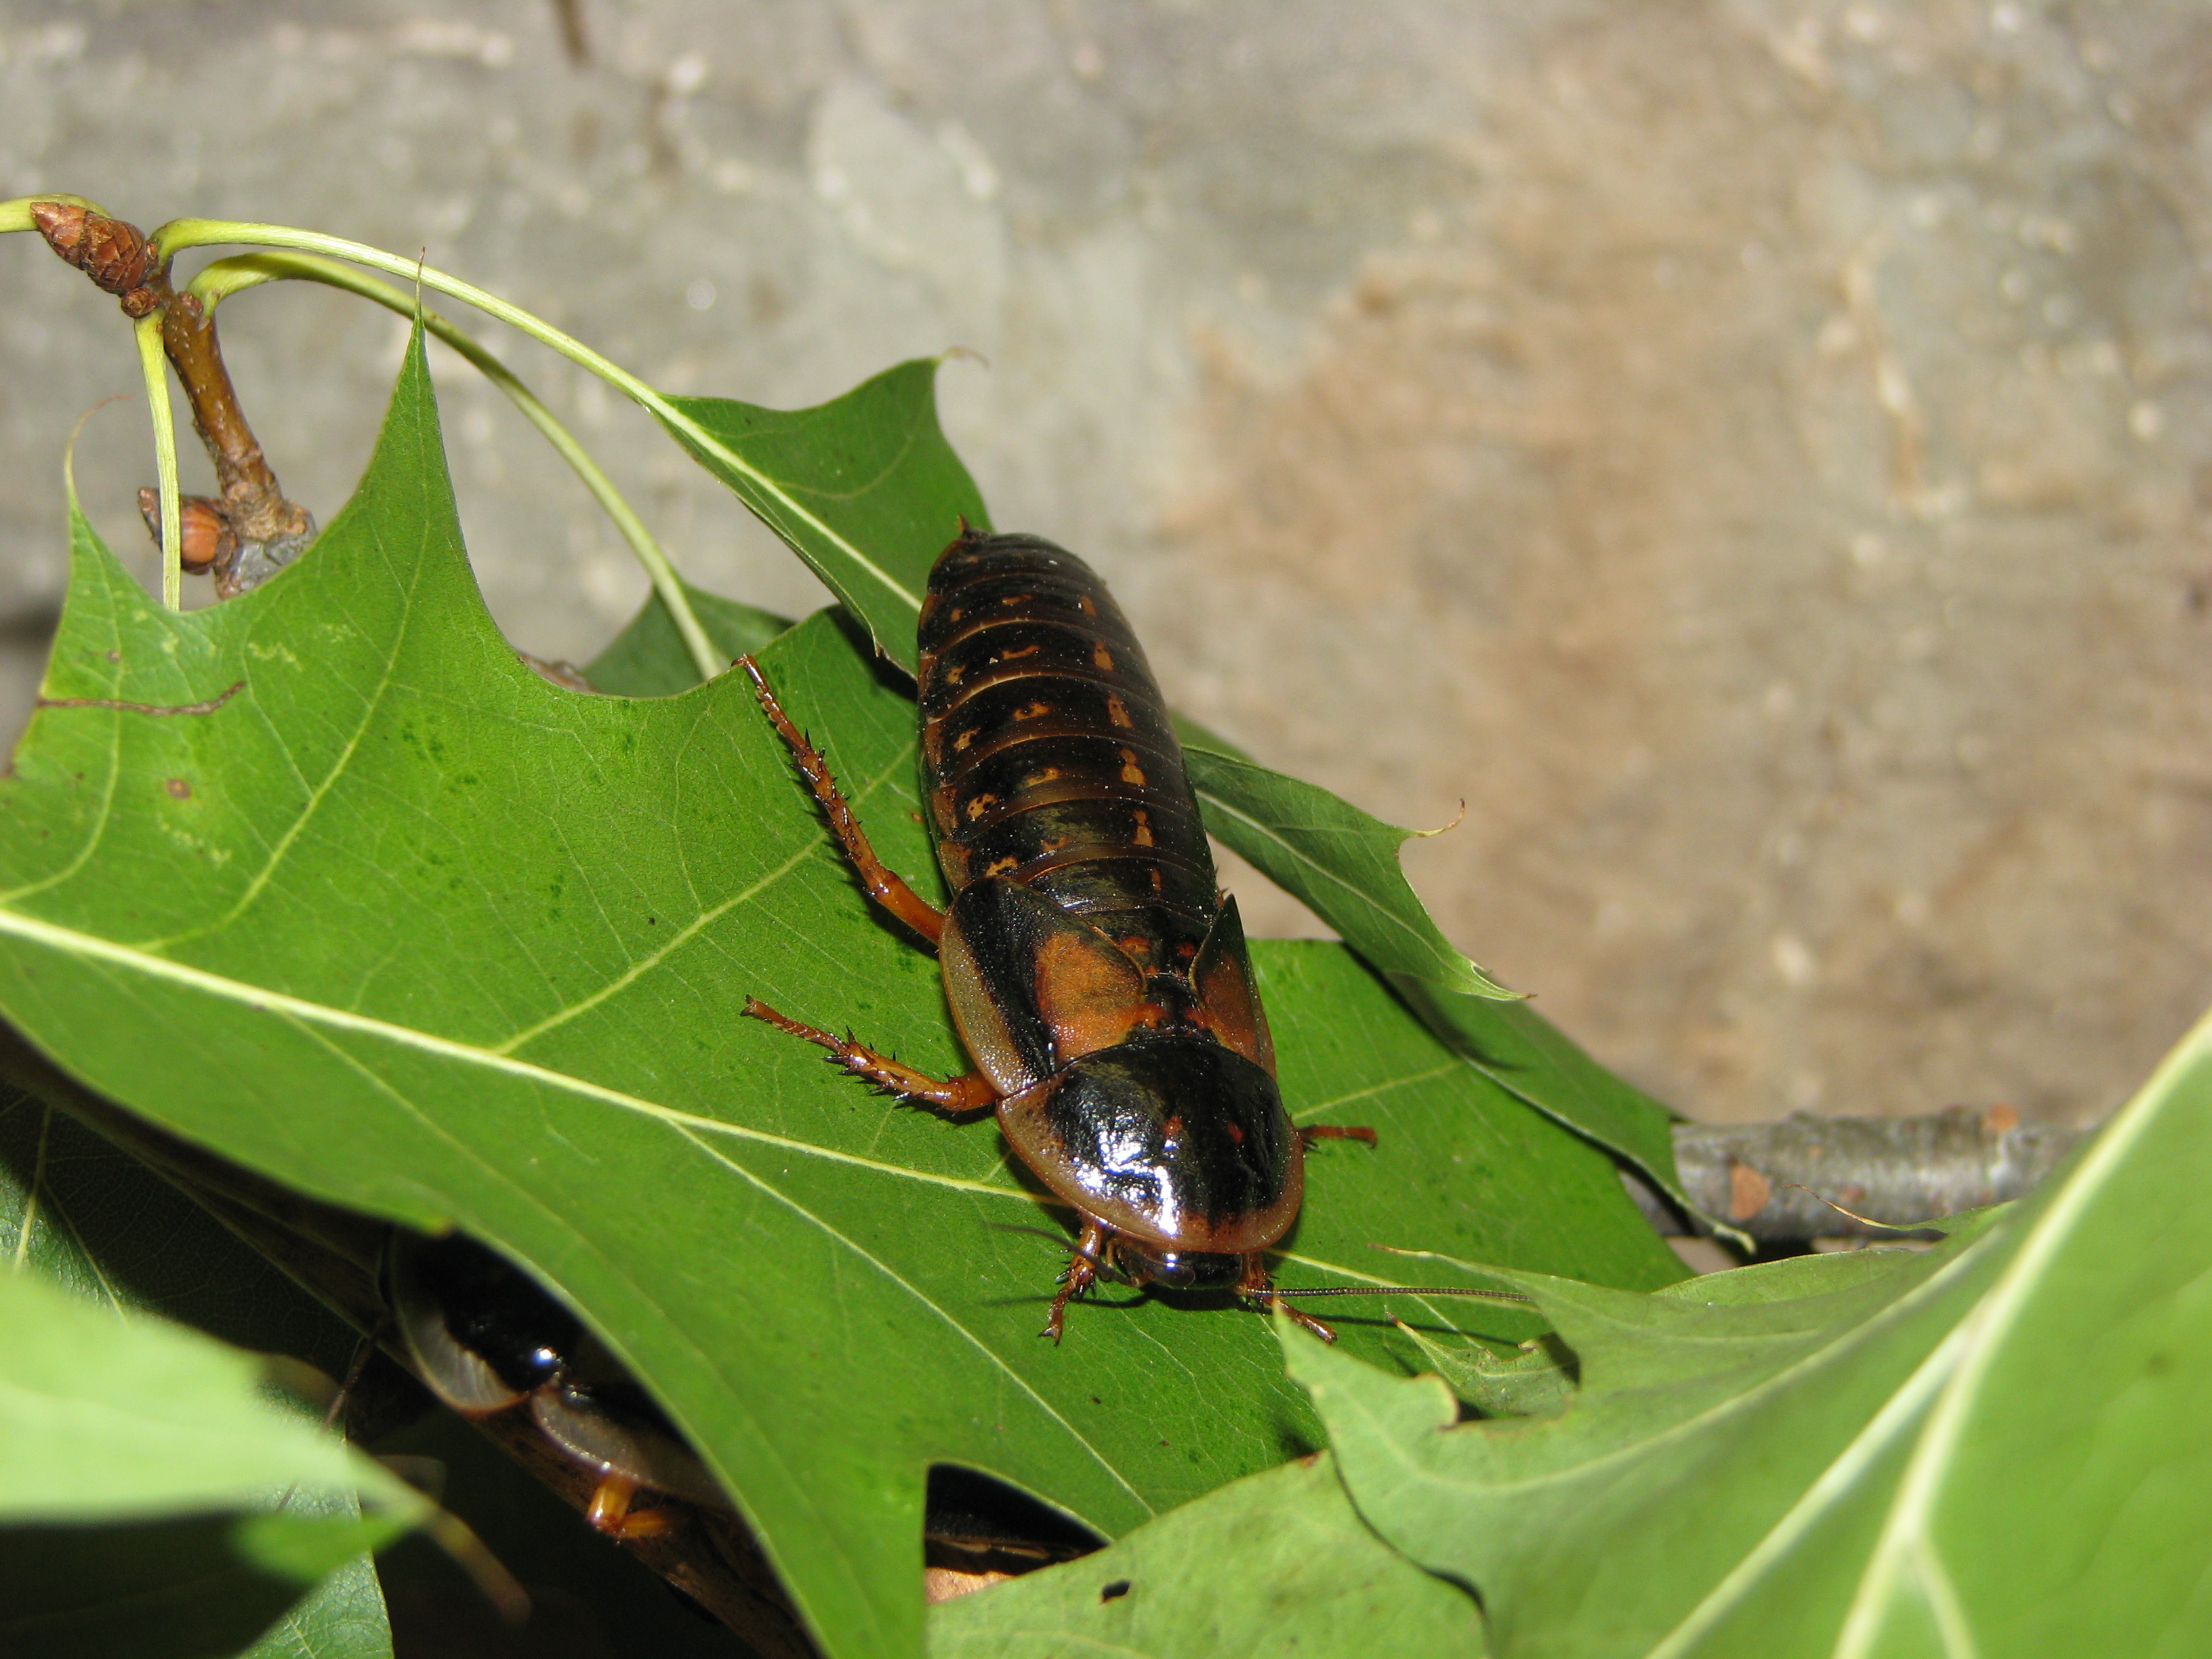 Picture of a Dubia roach.